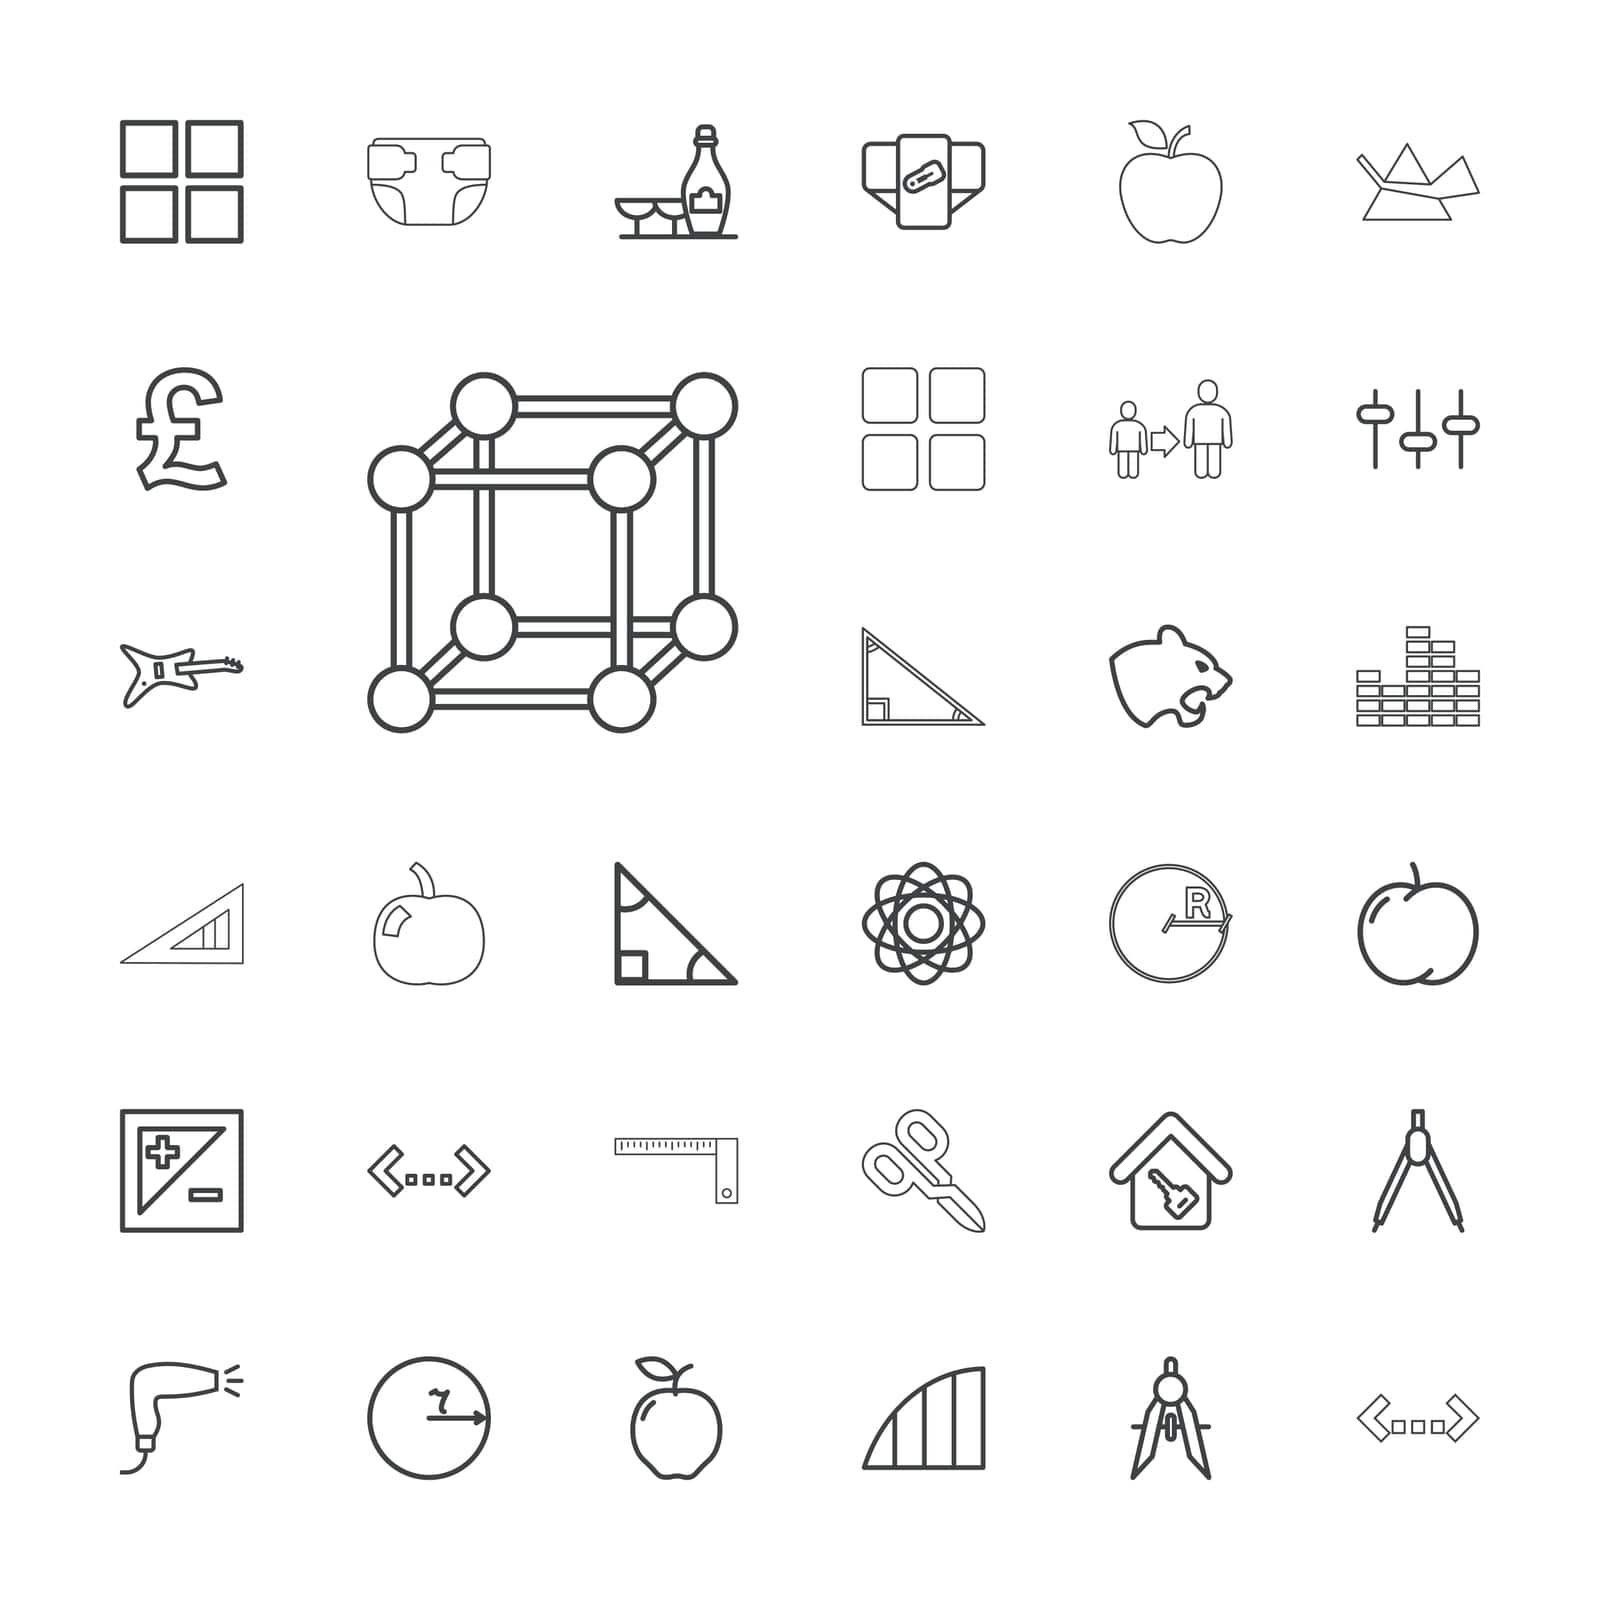 symbol,father,concept,icon,sign,isolated,ruler,triangle,glasses,apple,hair,pound,son,white,equalizer,and,intersection,champagne,angle,vector,cube,key,set,shape,dryer,home,guitar,scissors,exposure,light,compass,background,geometric,panther,illustration,diaper,circle,manicure,atom,quotation,wine by ogqcorp